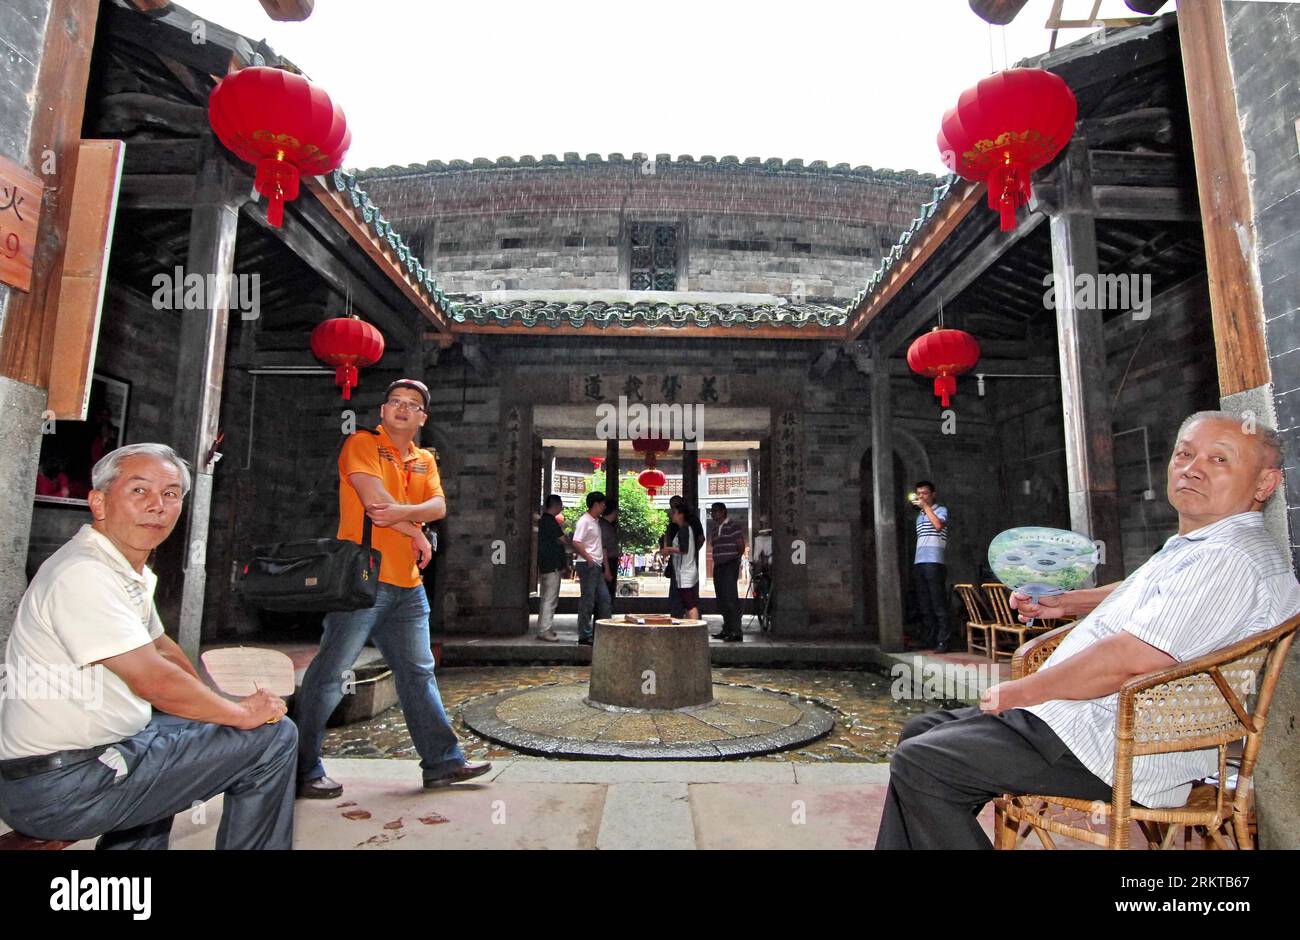 Bildnummer: 58432806  Datum: 04.09.2012  Copyright: imago/Xinhua (120905) -- YONGDING, Sept. 5, 2012 (Xinhua) -- Tourists visit the Zhencheng Tulou in Yongding County, southeast China s Fujian Province, Sept. 4, 2012. Fujian Tulou is a type of Chinese rural dwellings of the Hakka and Minnan in the mountainous areas in Fujian Province. The layout of Fujian Tulou followed the Chinese dwelling tradition of closed outside, open inside concept: an enclosure wall with living quarters around the peripheral and a common courtyard at the center. A Tulou is usually a large, enclosed and fortified earth Stock Photo